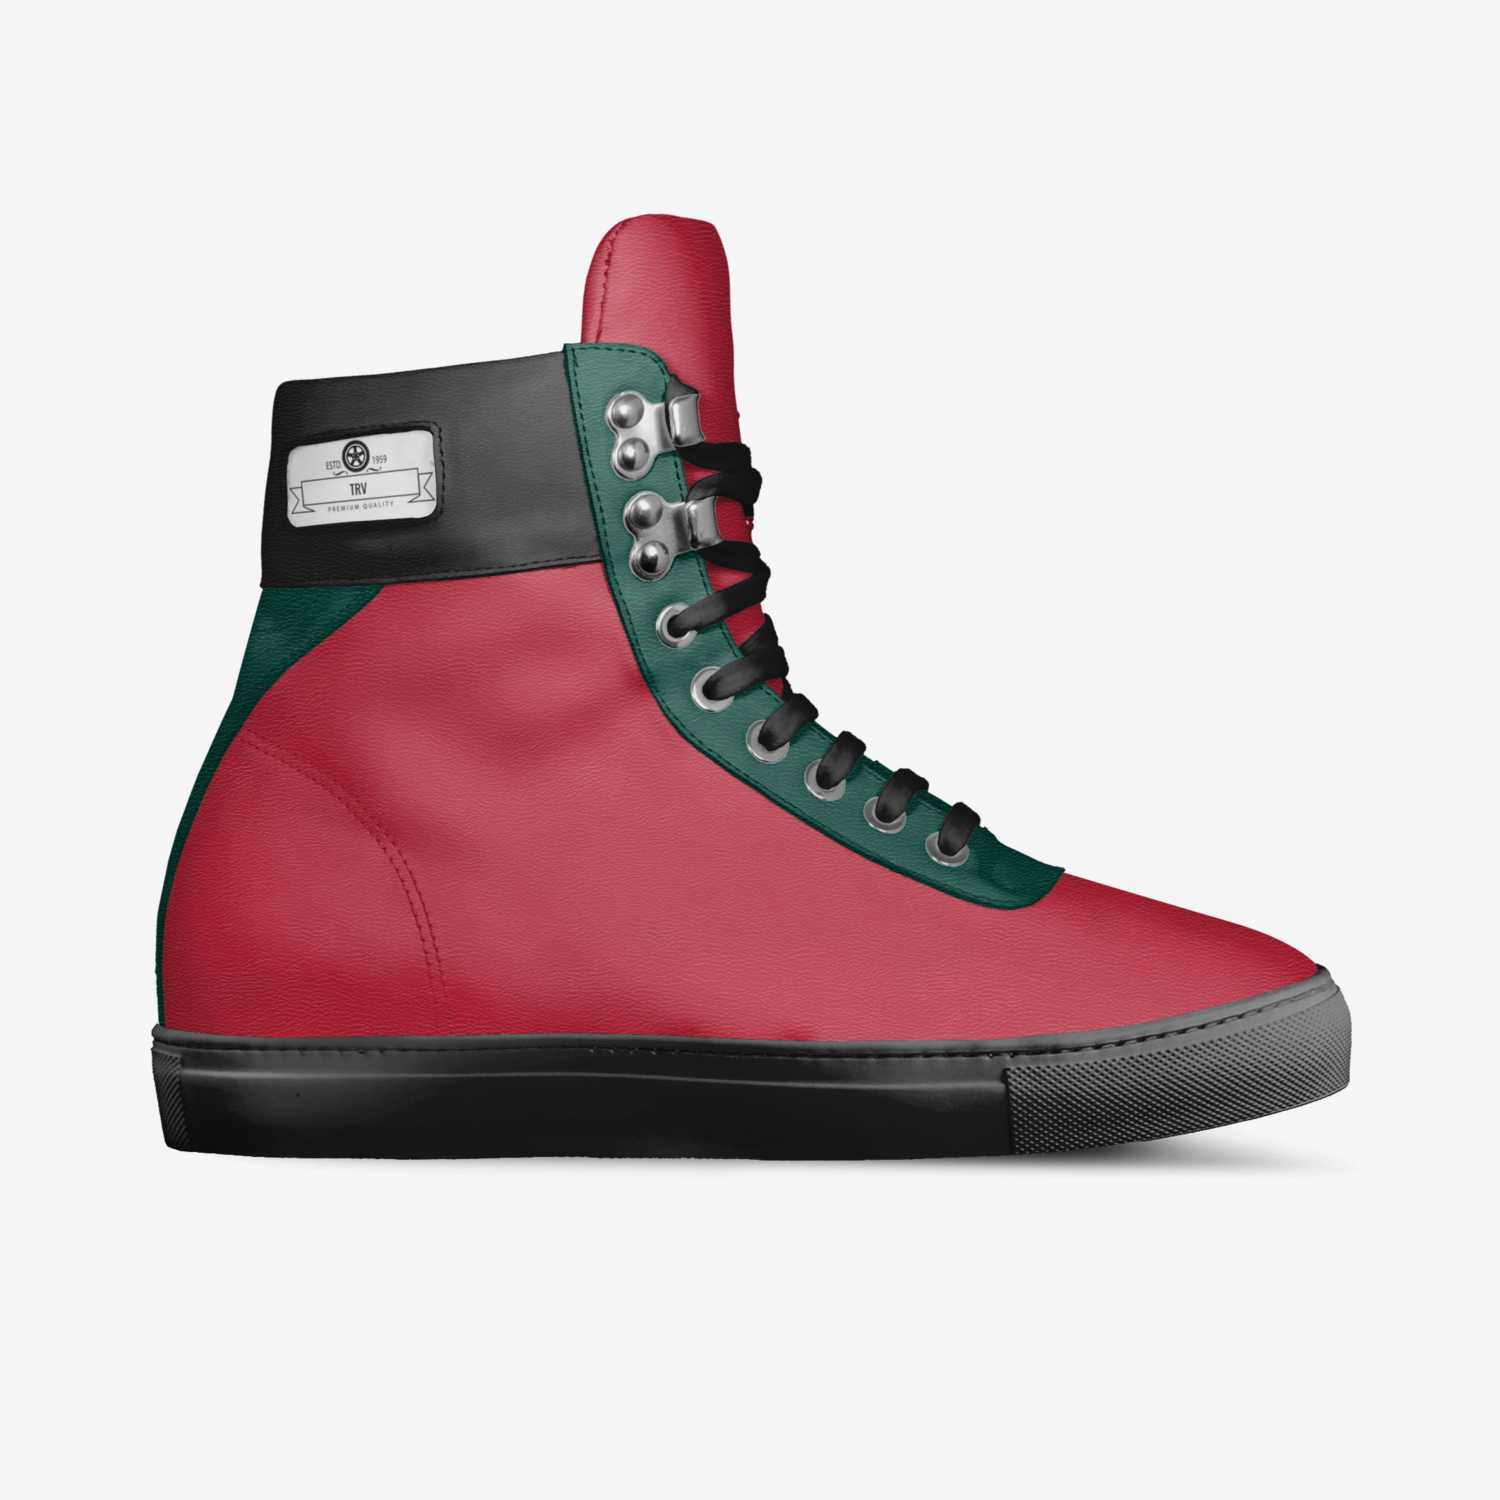 Trv | A Custom Shoe concept by Dylan